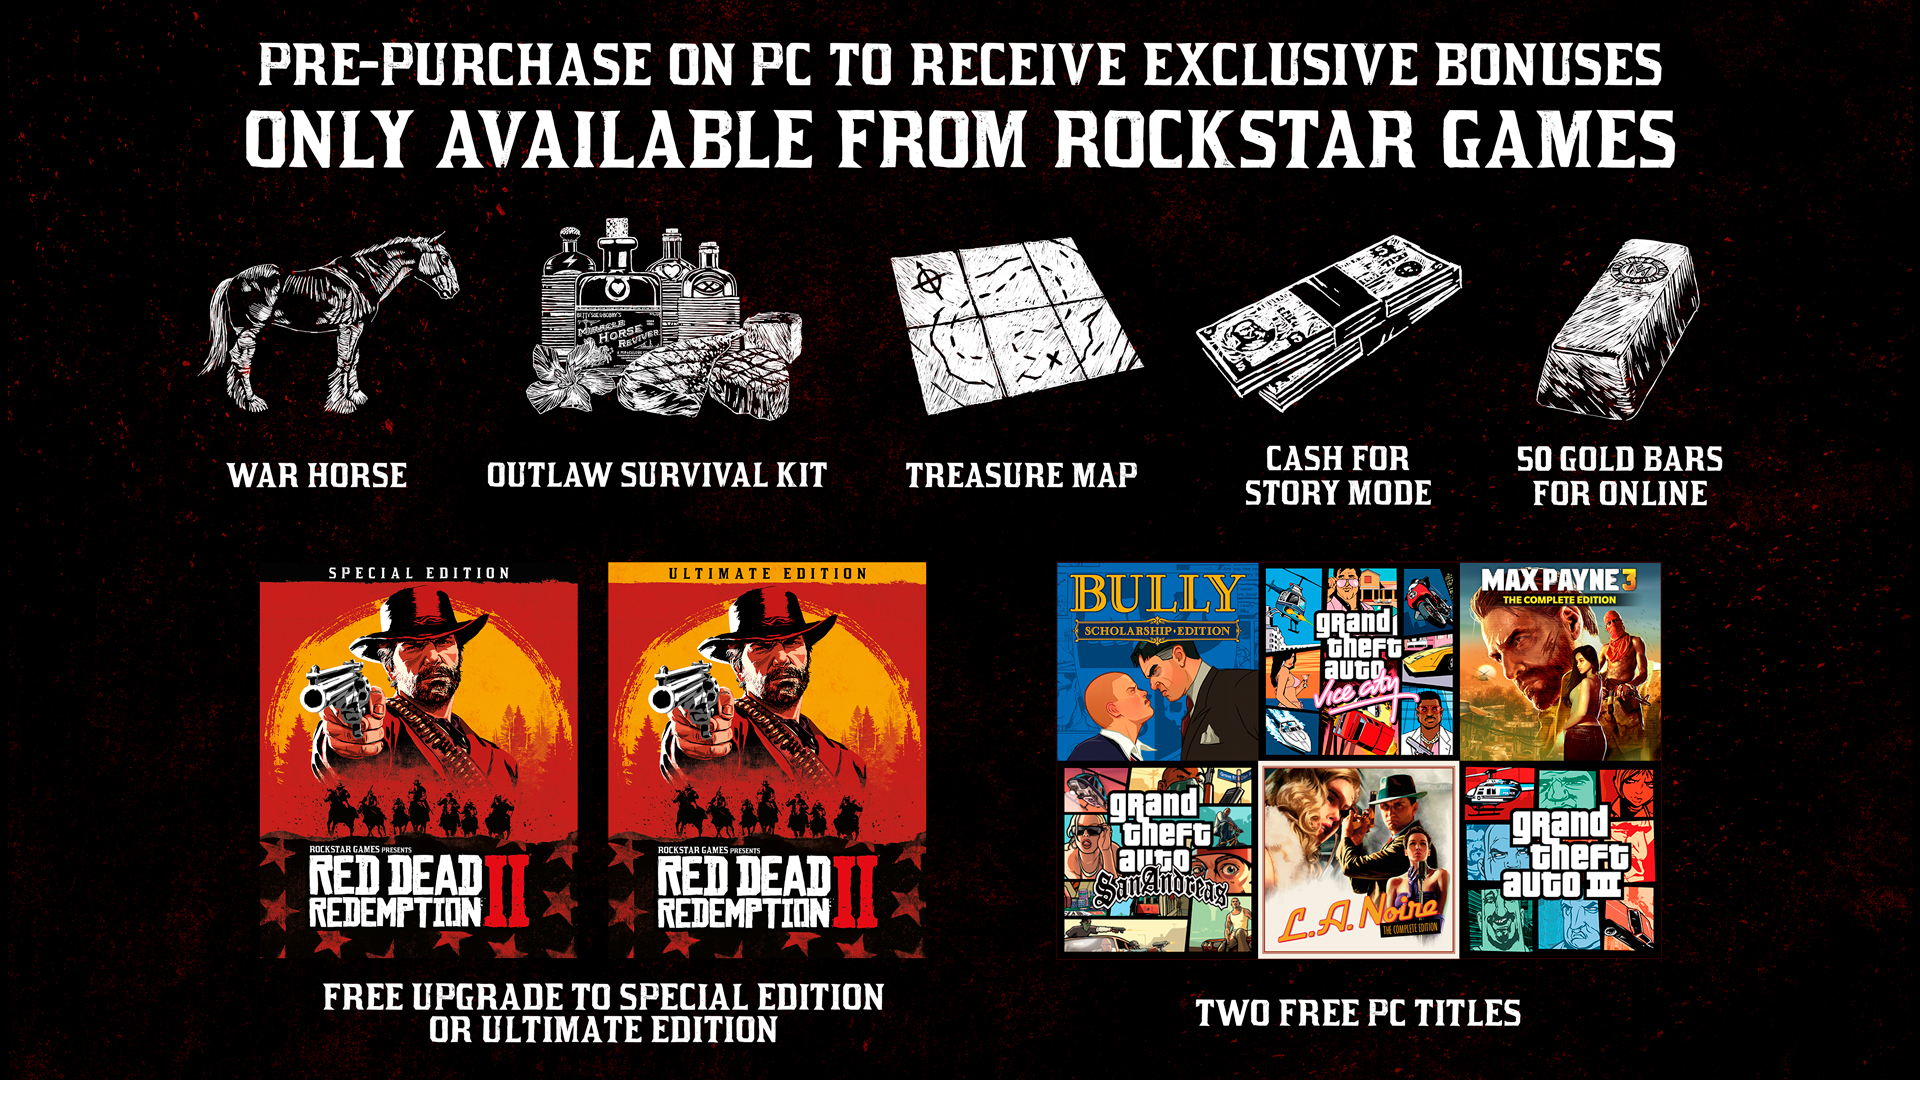 Игры rockstar games red. Red Dead Redemption 2: Ultimate Edition. Rdr 2 Ultimate Edition диск. Red Redemption 2 системные требования. Red Dead Redemption 2 системные требования на ПК.